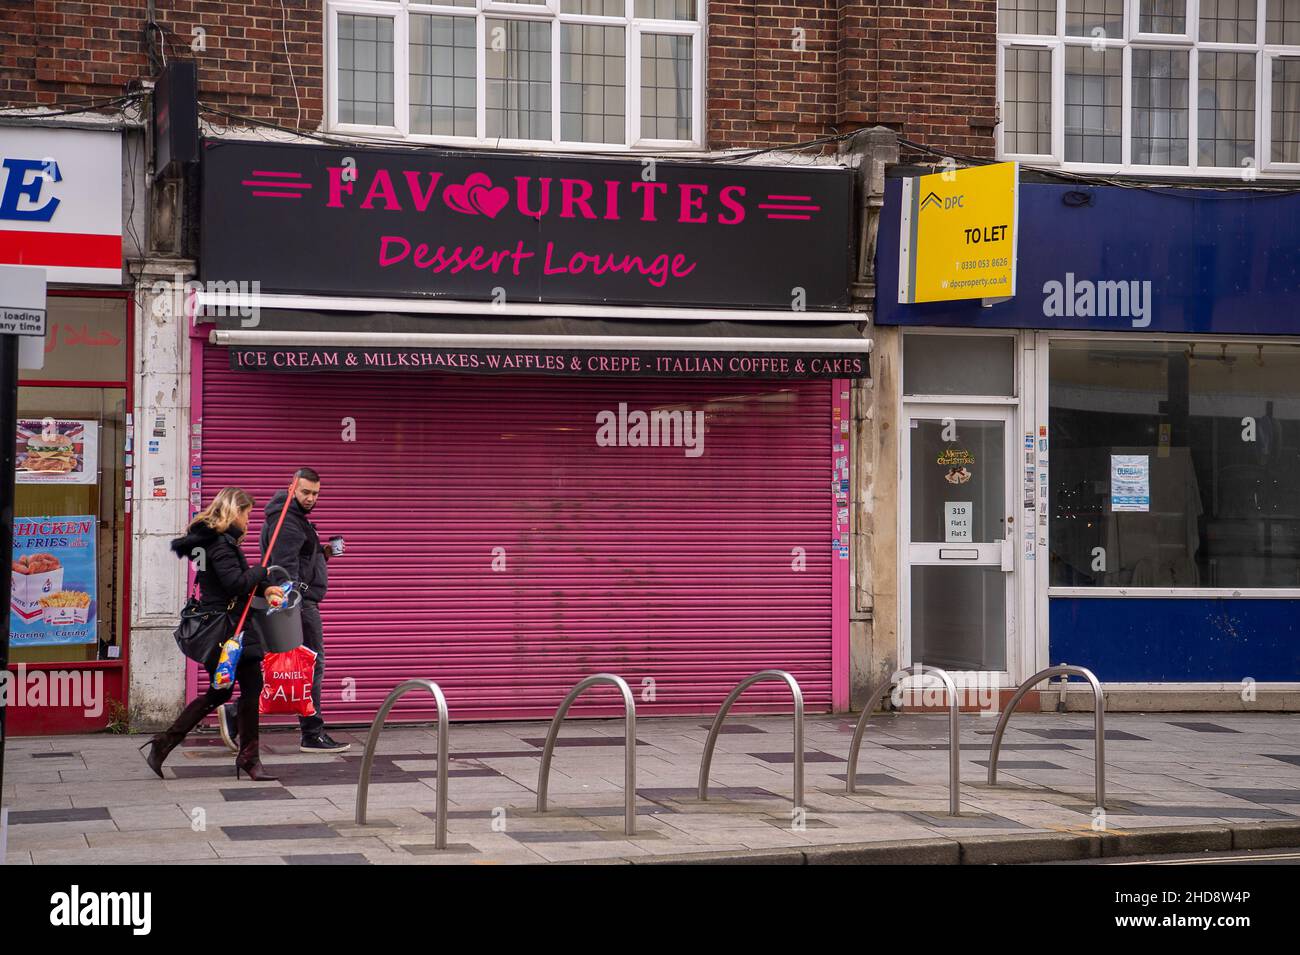 Slough, Berkshire, UK. 30th  December, 2021. Shutters down at a cafe in Slough. Credit: Maureen McLean/Alamy Stock Photo